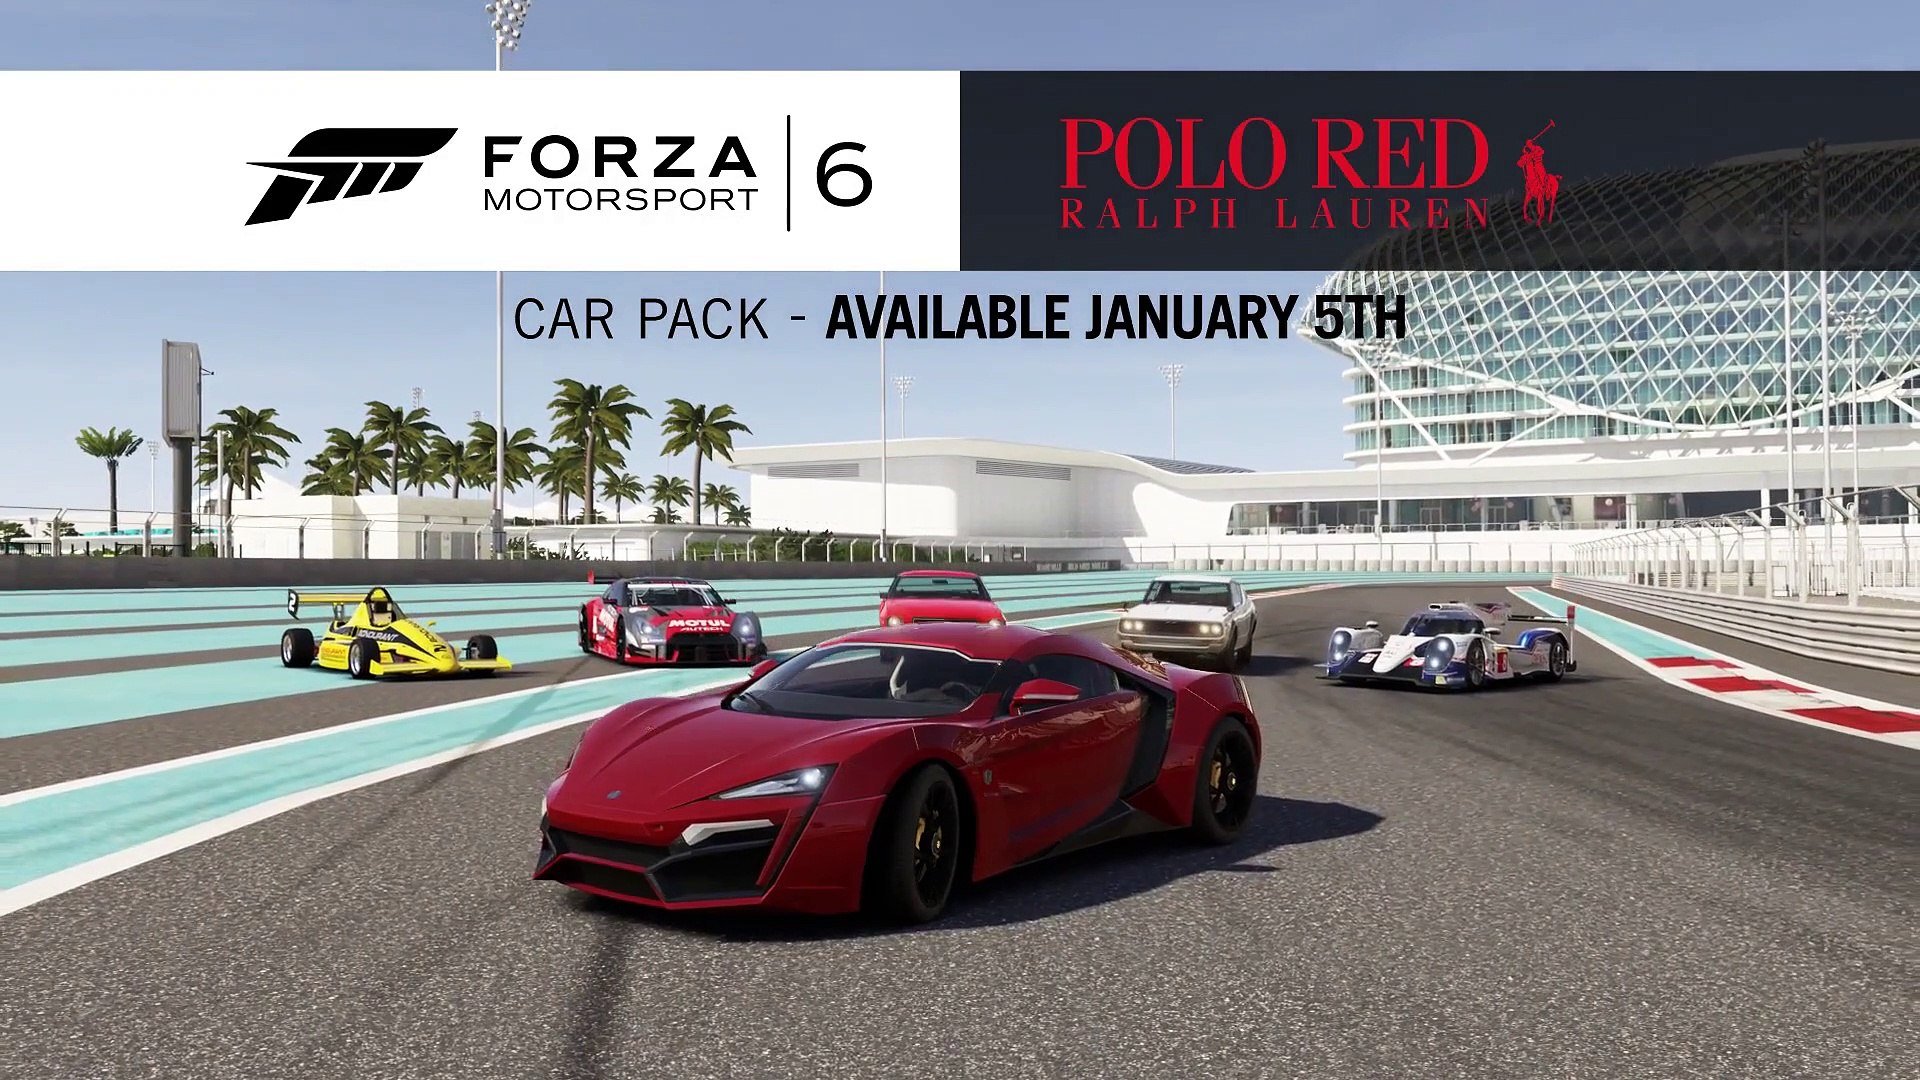 Dress Up Your Forza Motorsport 6 Garage with the Ralph Lauren Polo Red Car  Pack - Xbox Wire